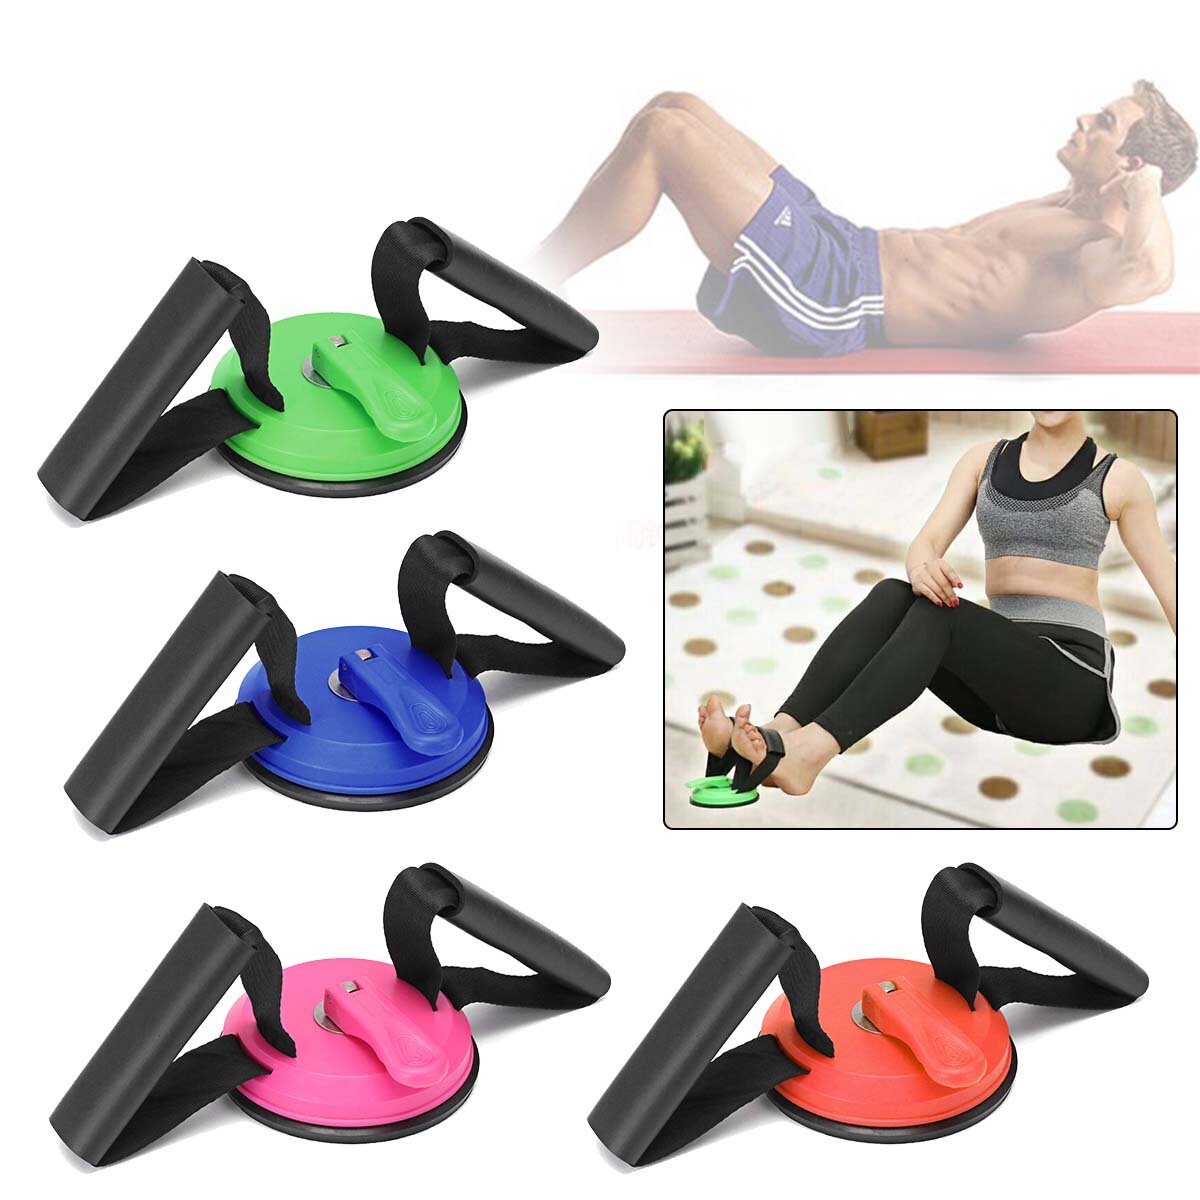 Abdominal Fitness Device Suction Cup Sit-up Aid Home Fitness Equipment Men's & Women's Abs Trainer